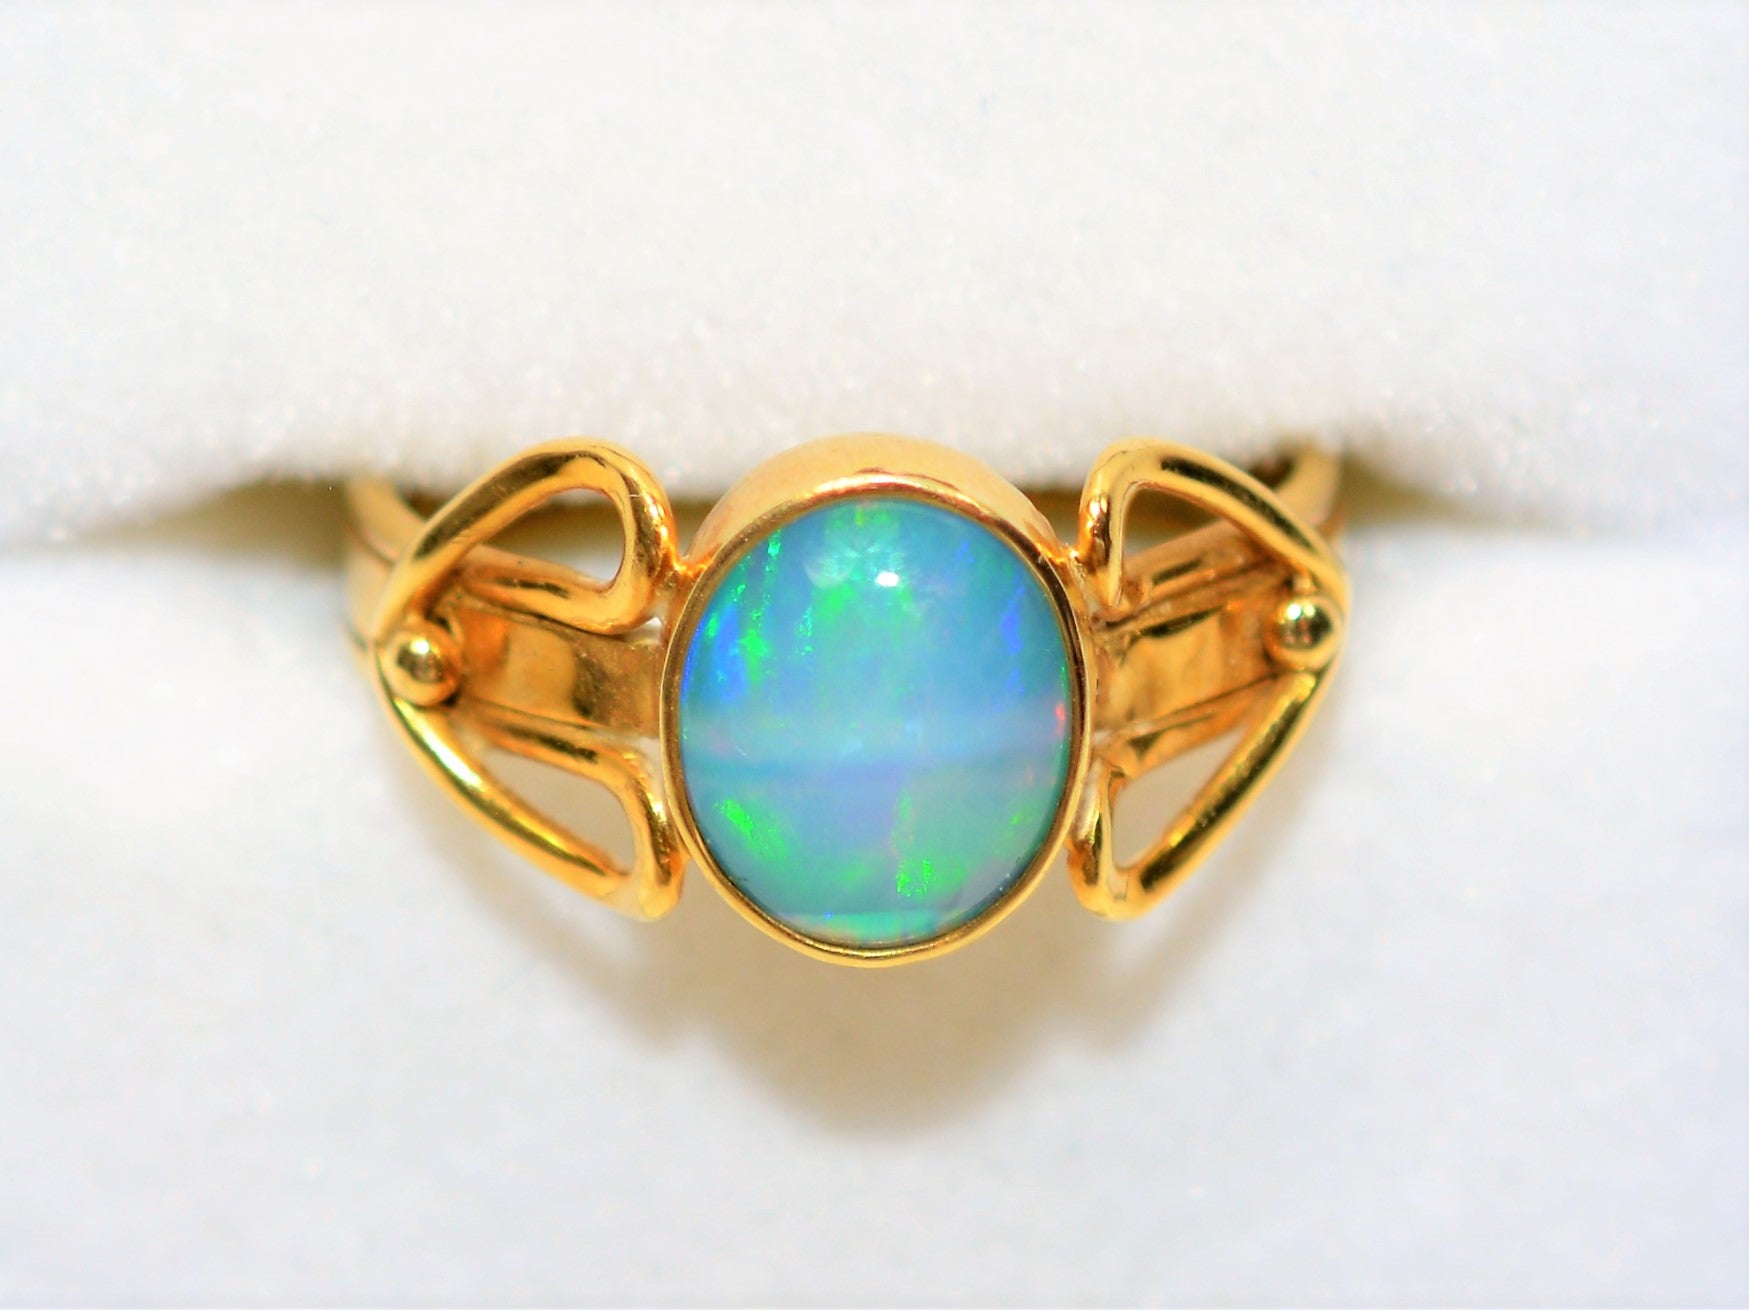 Opex Natural Black Opal Ring 18K Solid Gold 1.70ct Lightning Ridge Opal Ring Solitaire Ring Vintage Ring Birthstone Ring Estate Ring Jewelry